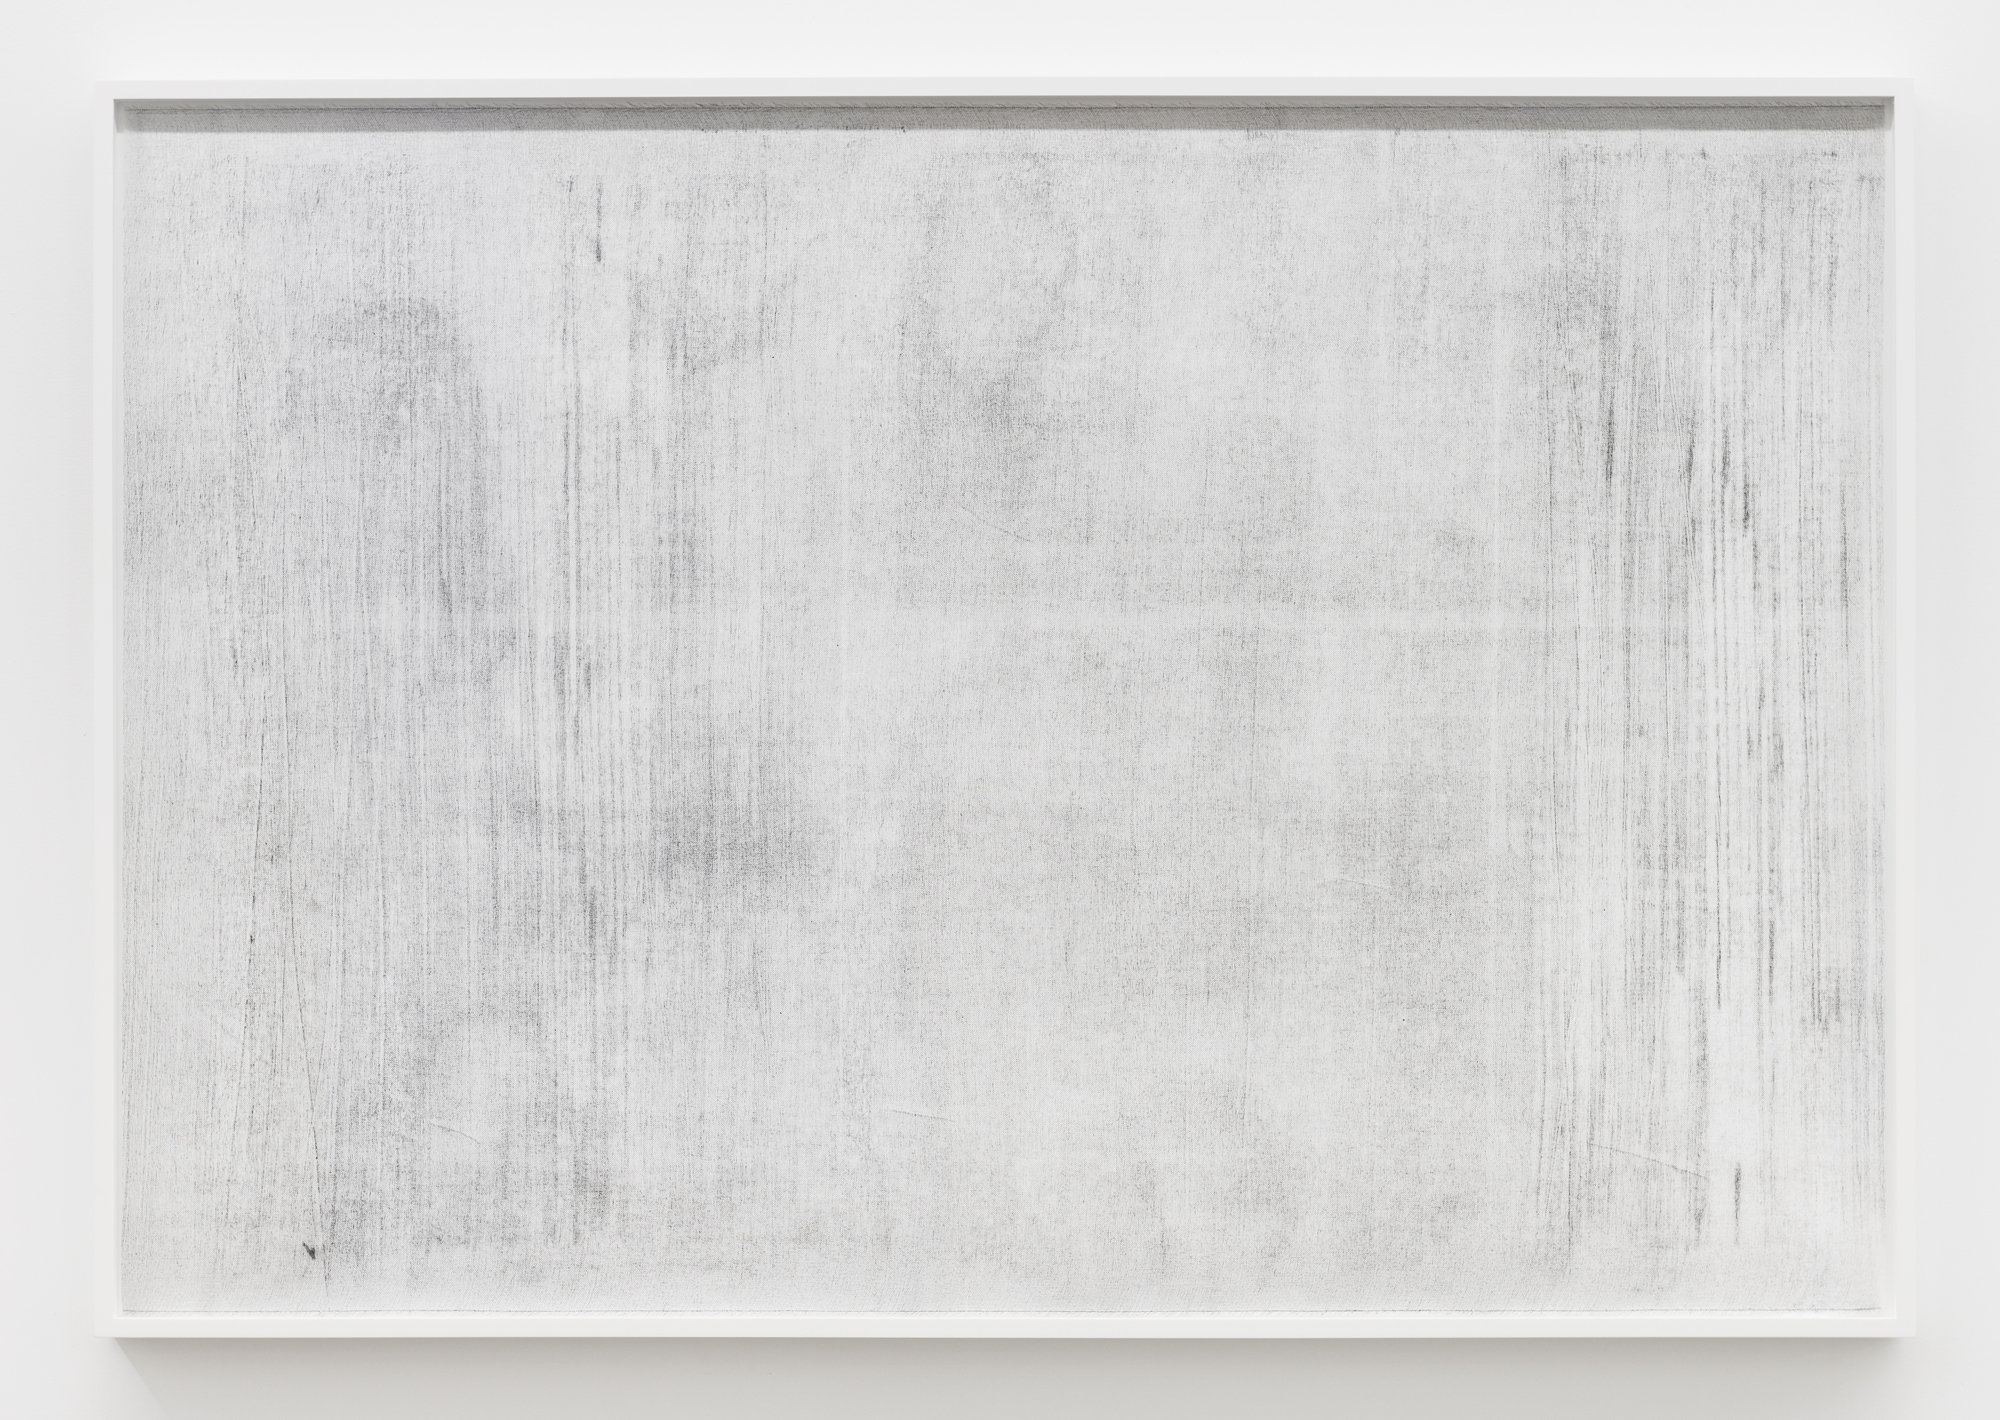   Untitled (where it becomes clear #1) , Oil based paint, graphite and charcoal on tarlatan, 2018, 41 x 59 inches 